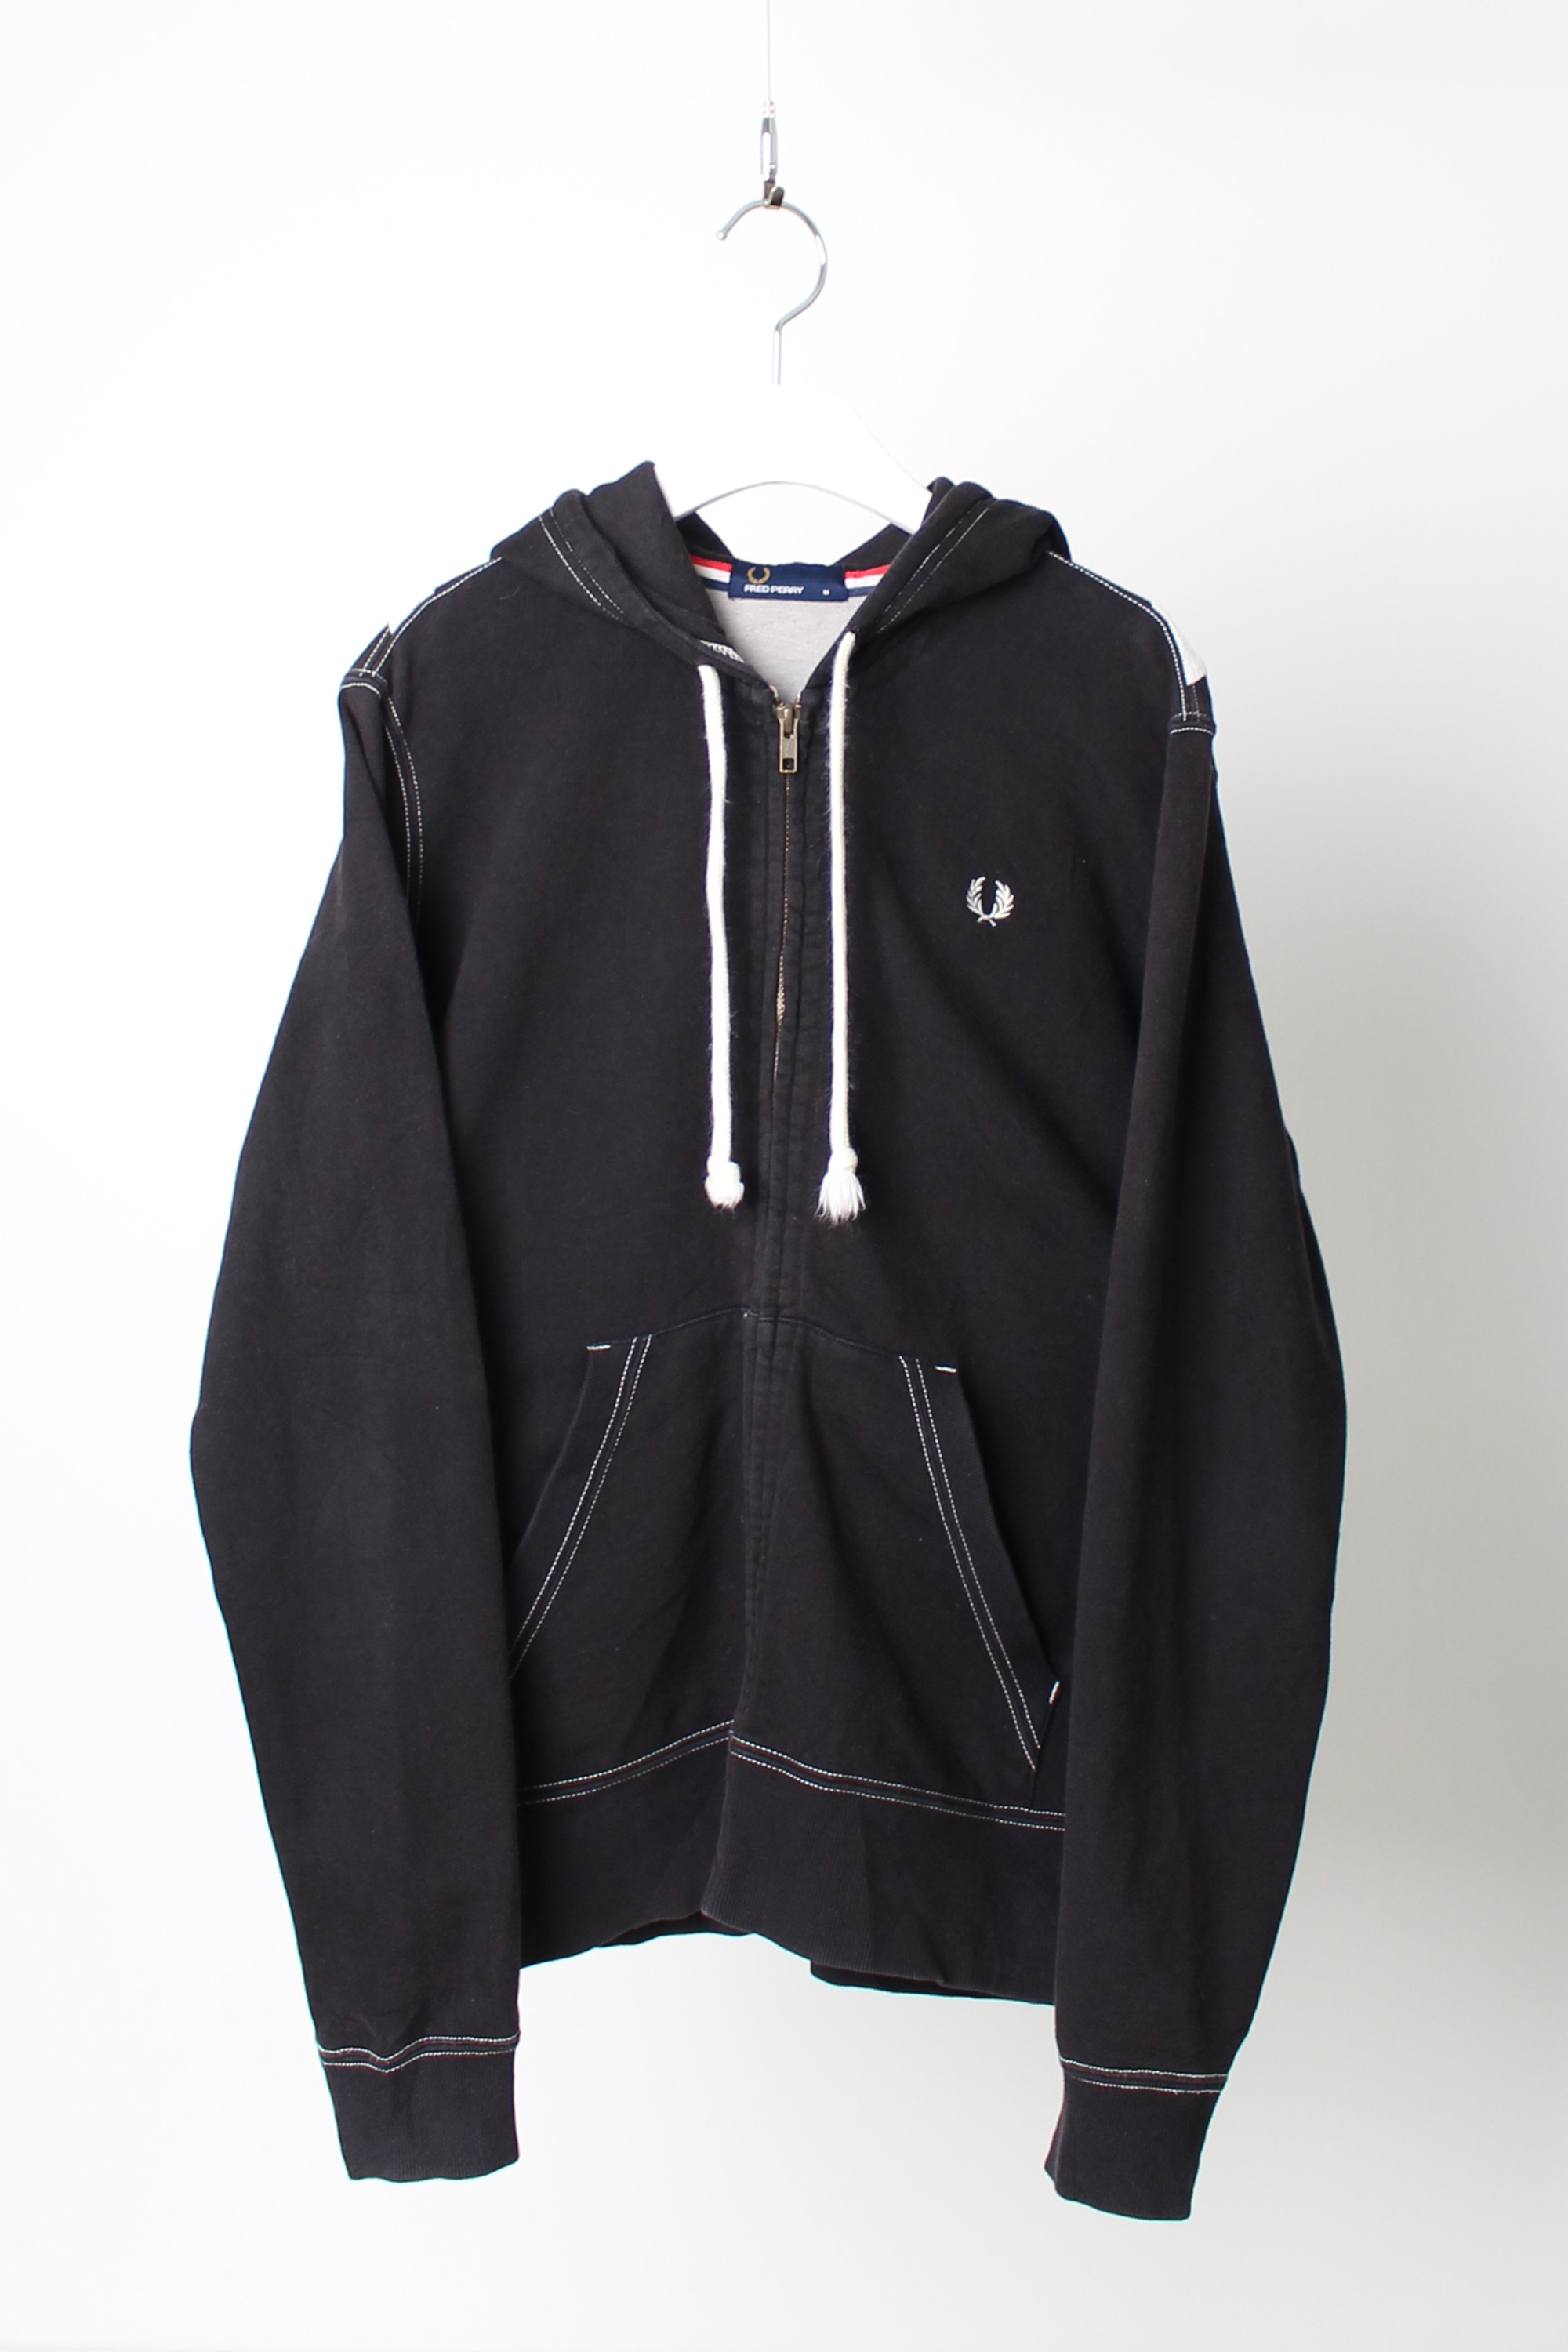 FRED PERRY hoodie